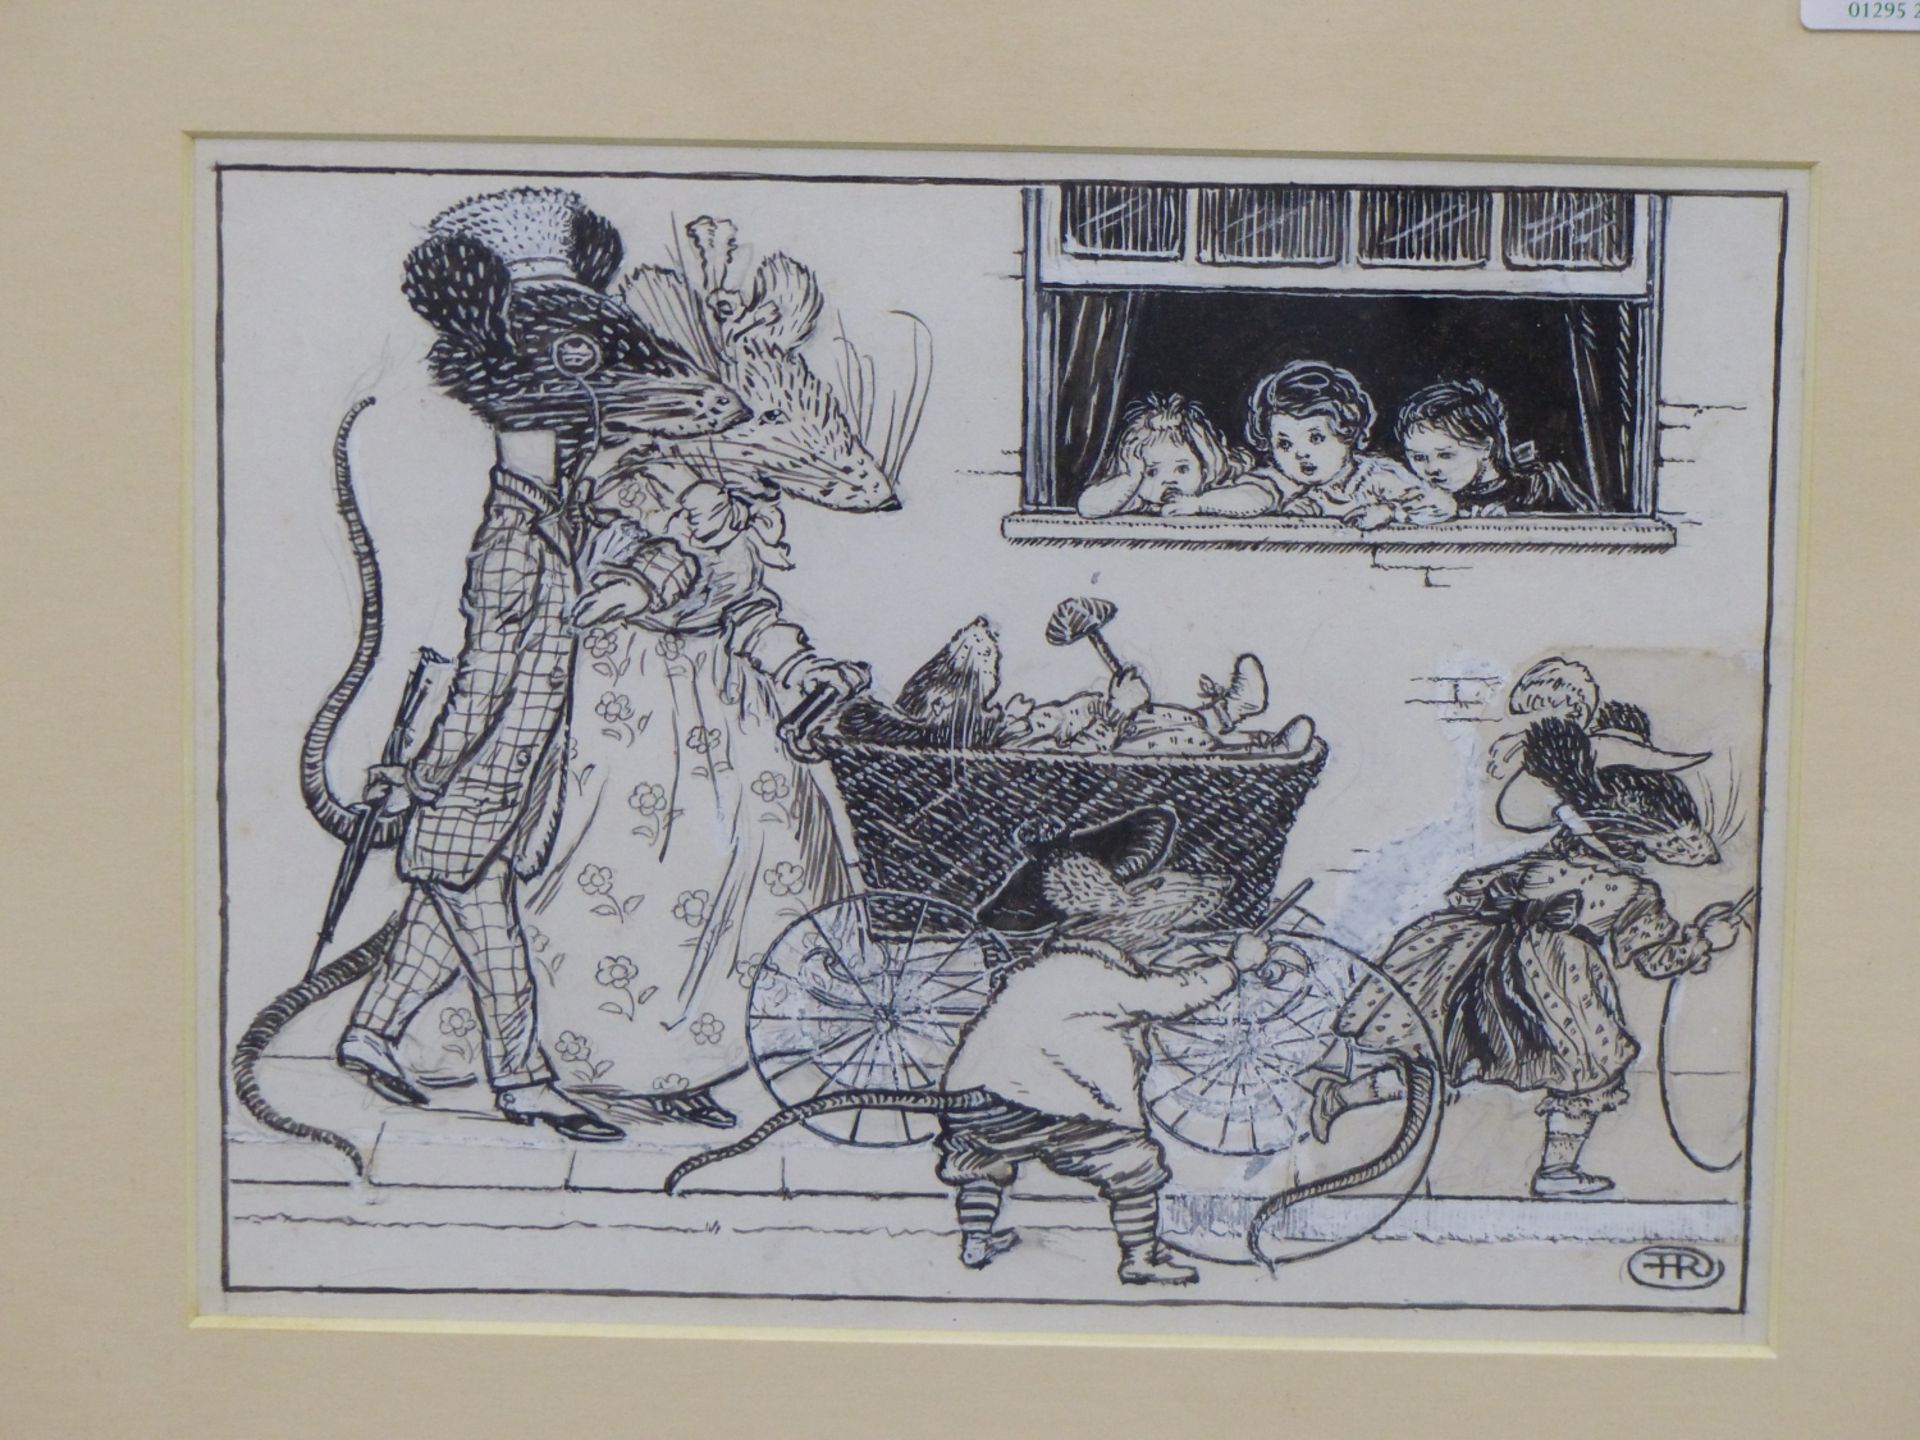 F.R. 20TH CENTURY CARTOONIST .TWO ILLUSTRATION WITH ANTHROPOMORPHIC MICE. PEN INK AND WATERCOLOUR. - Image 2 of 5